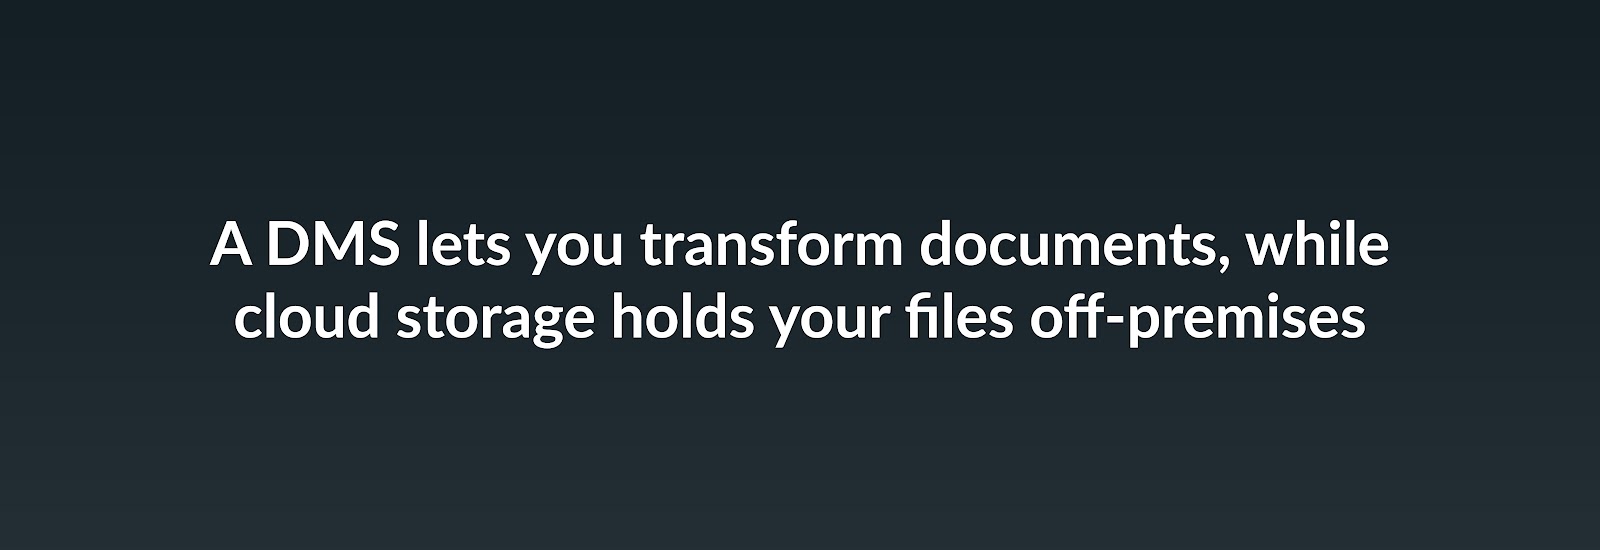 A DMS lets you transform documents, while cloud storage holds your files off-premises